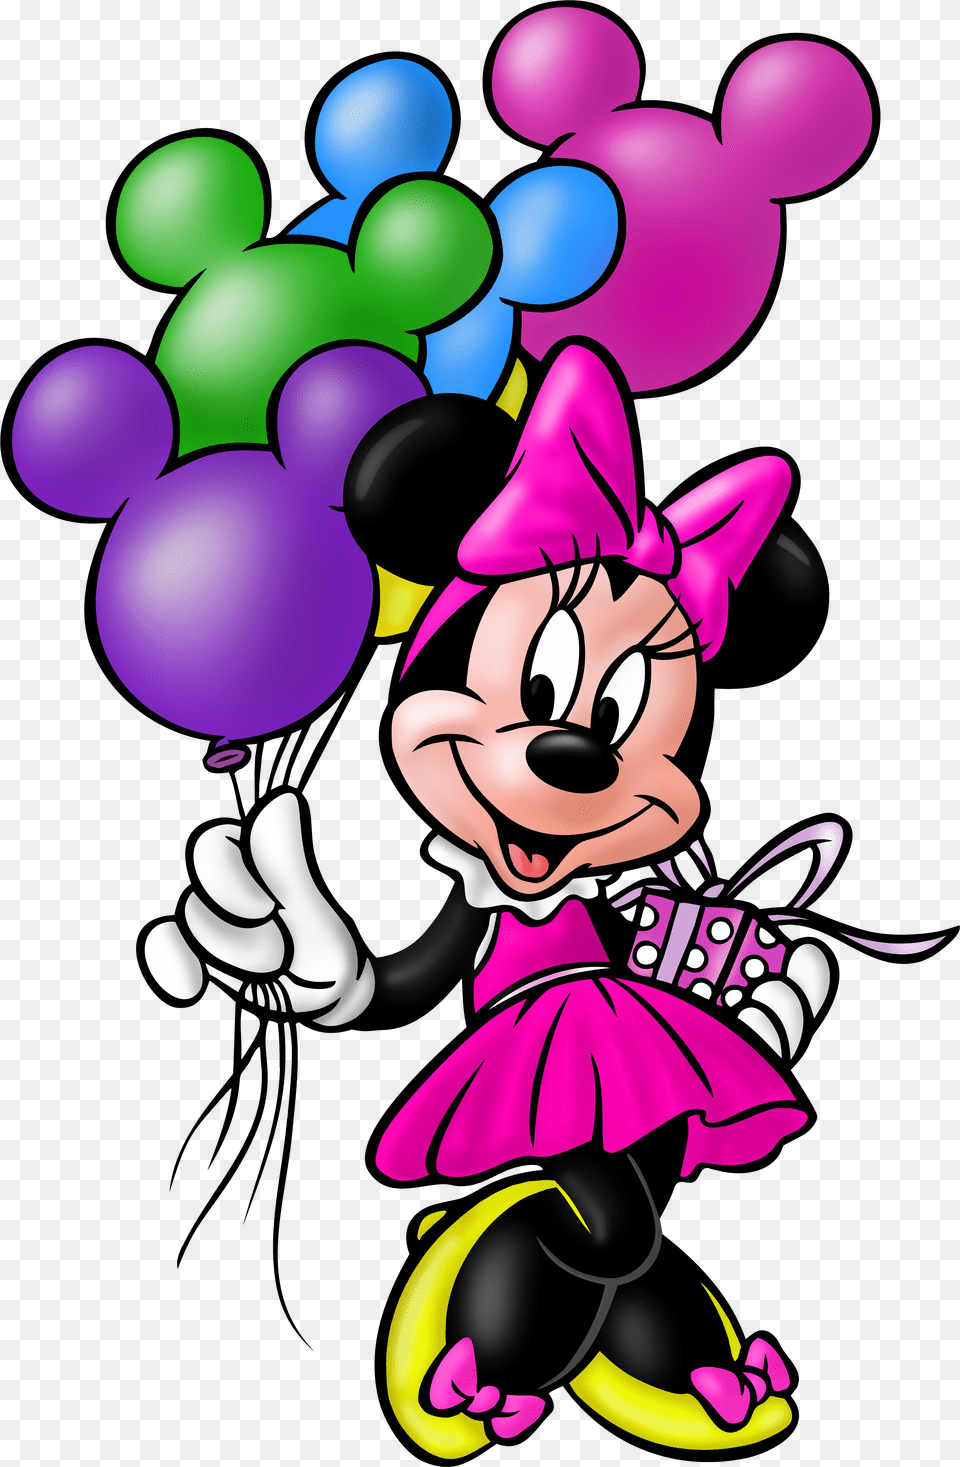 Minnie Mouse With Balloons Free Png Download